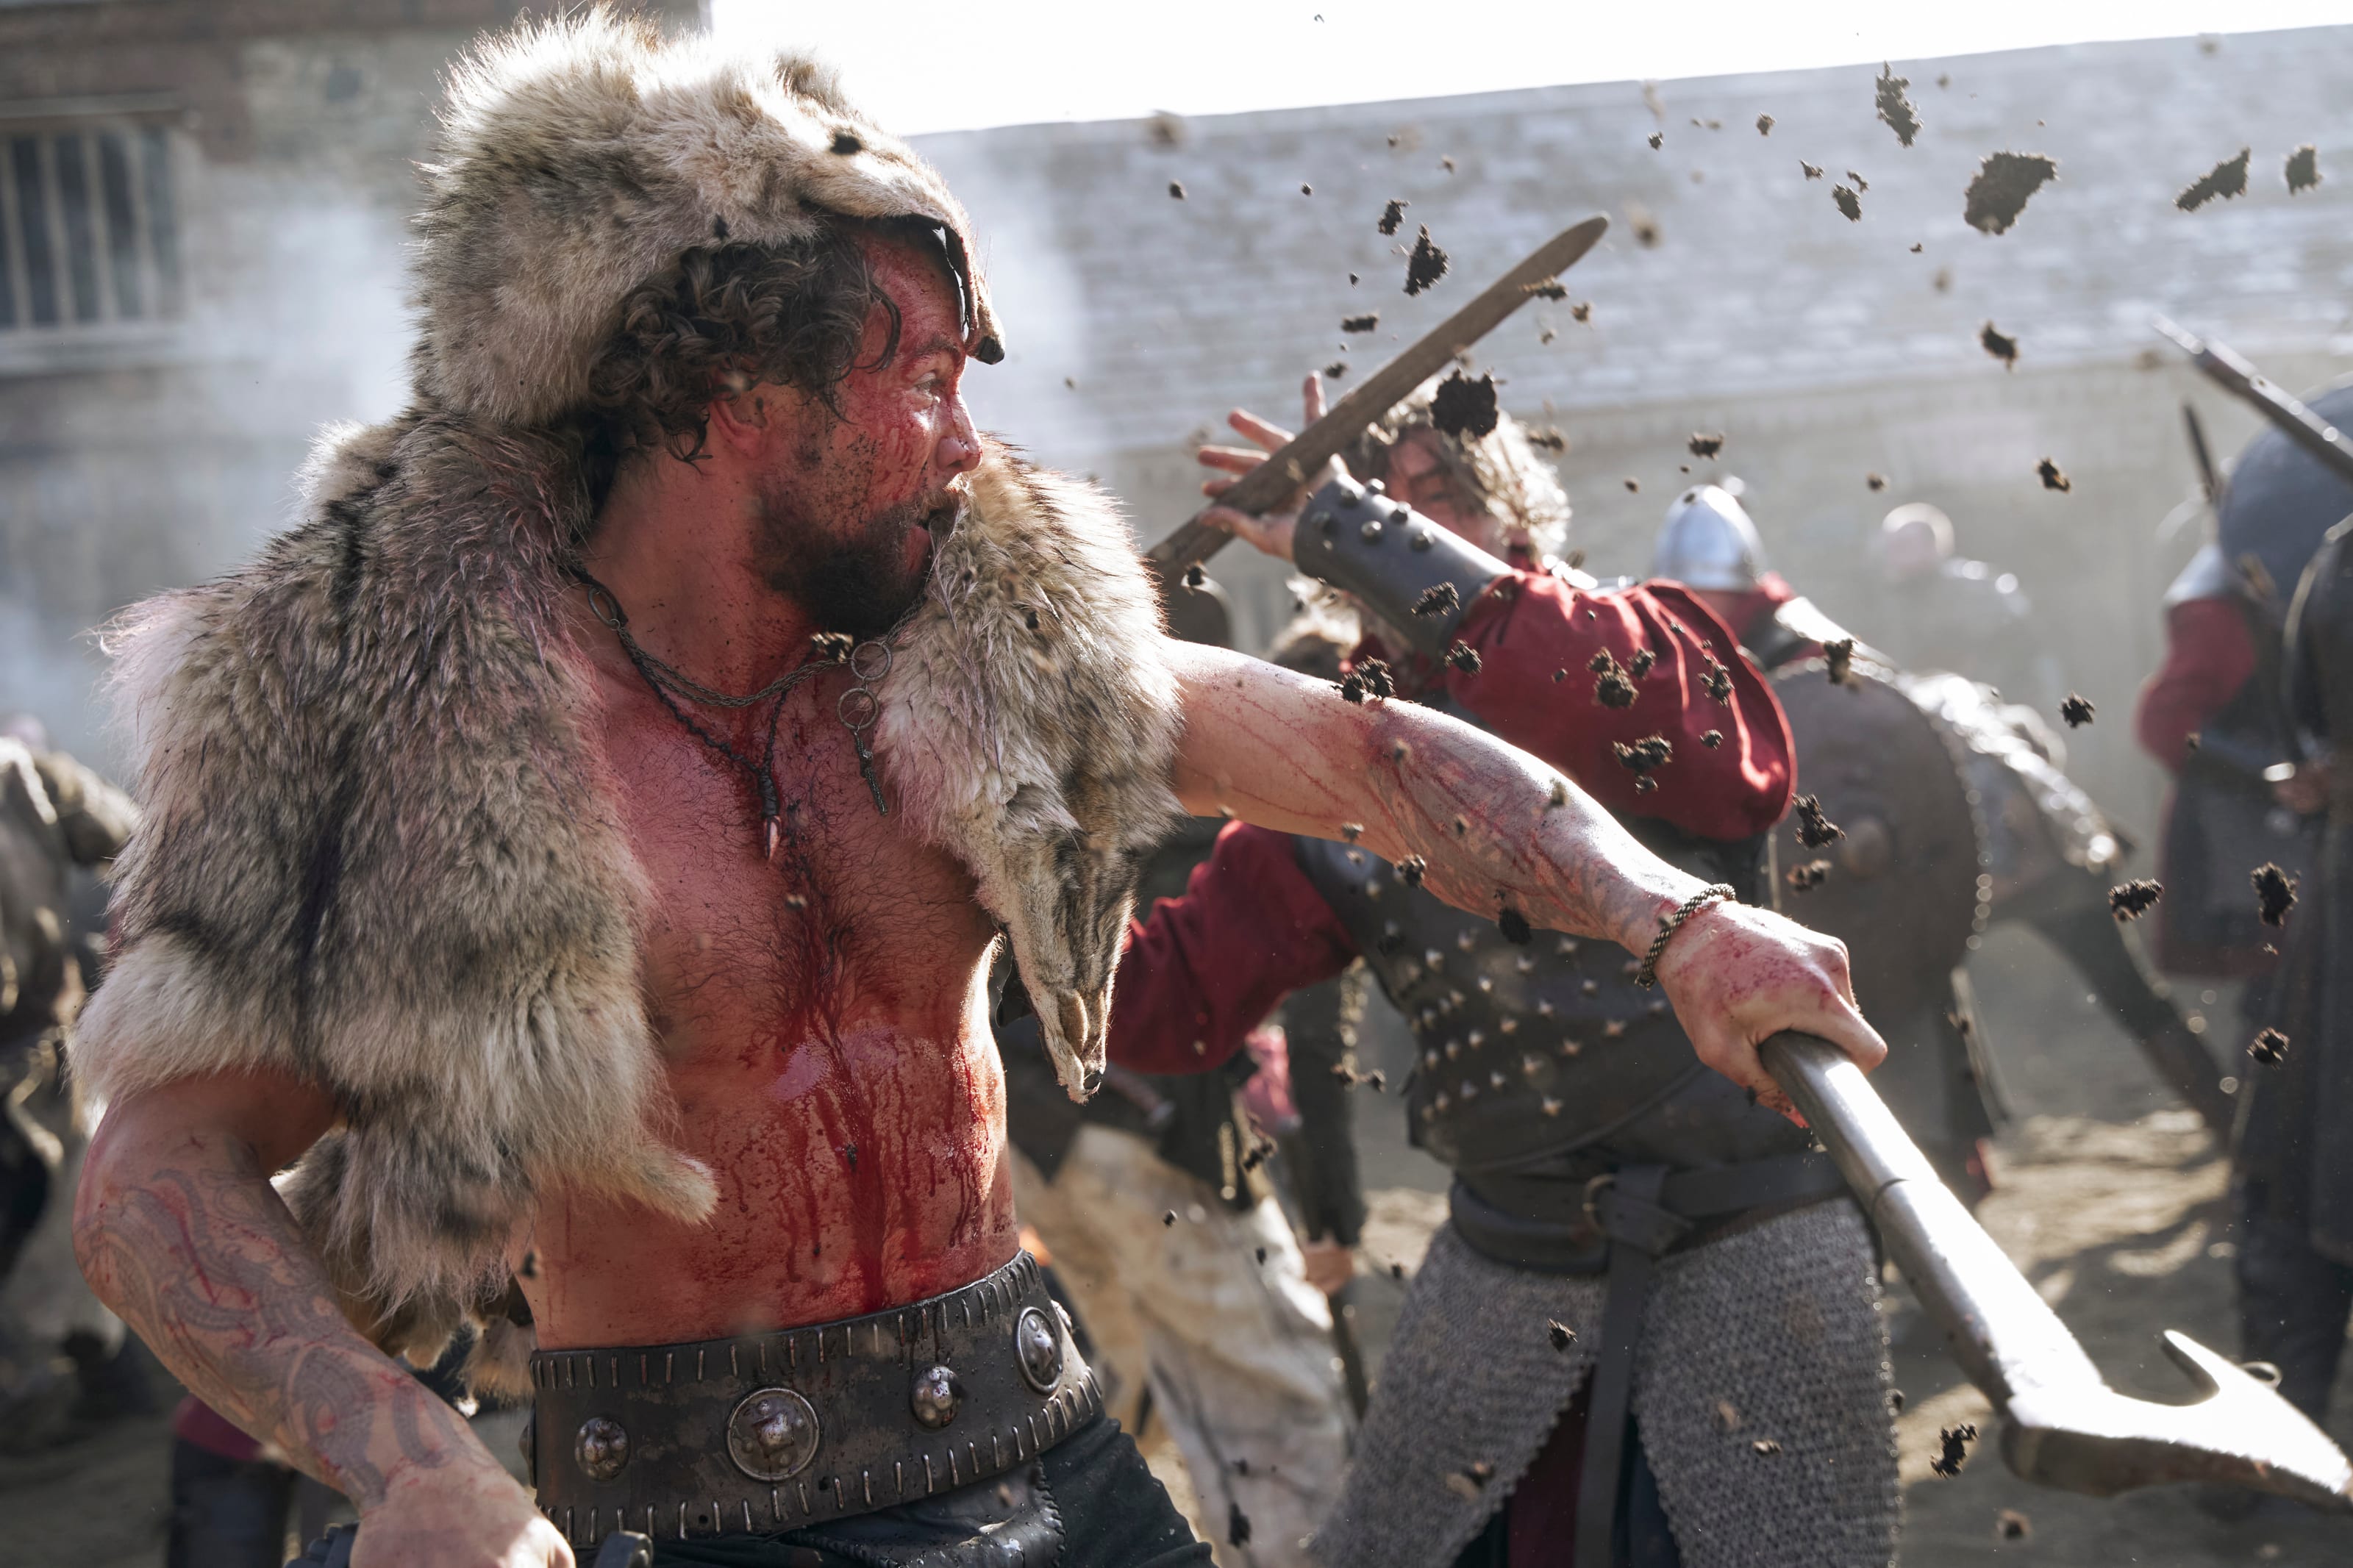 Vikings: Valhalla season 1—All episodes reviewed and explained - Page 5